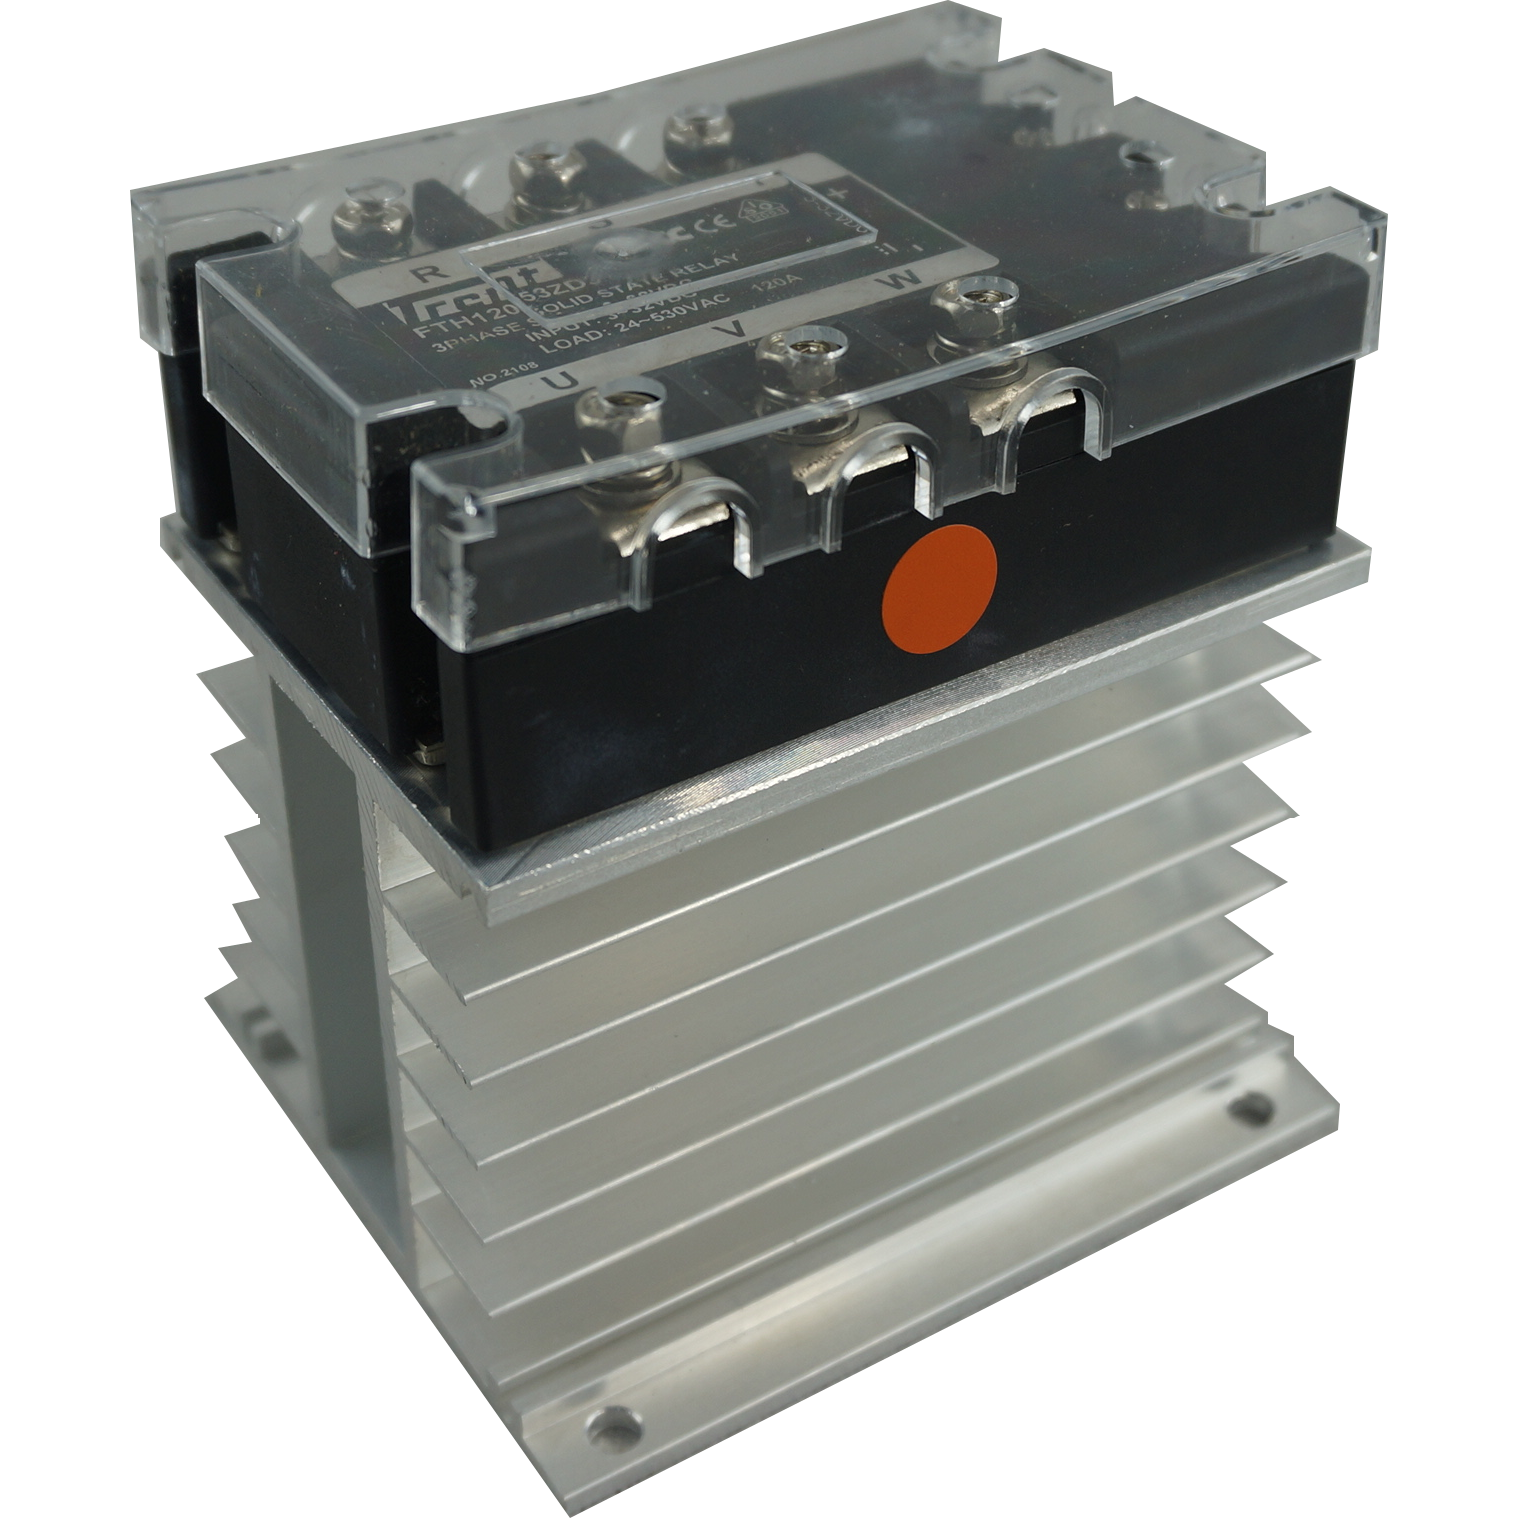 FTH2553ZD3 + HS212, Solid State Relay, and Heatsink Assembly, 3 Phase 4-32VDC Control, 20 Amp per phase @ 40 Deg C, 48-530VAC Load, LED Status Indicator, with IP20 Cover